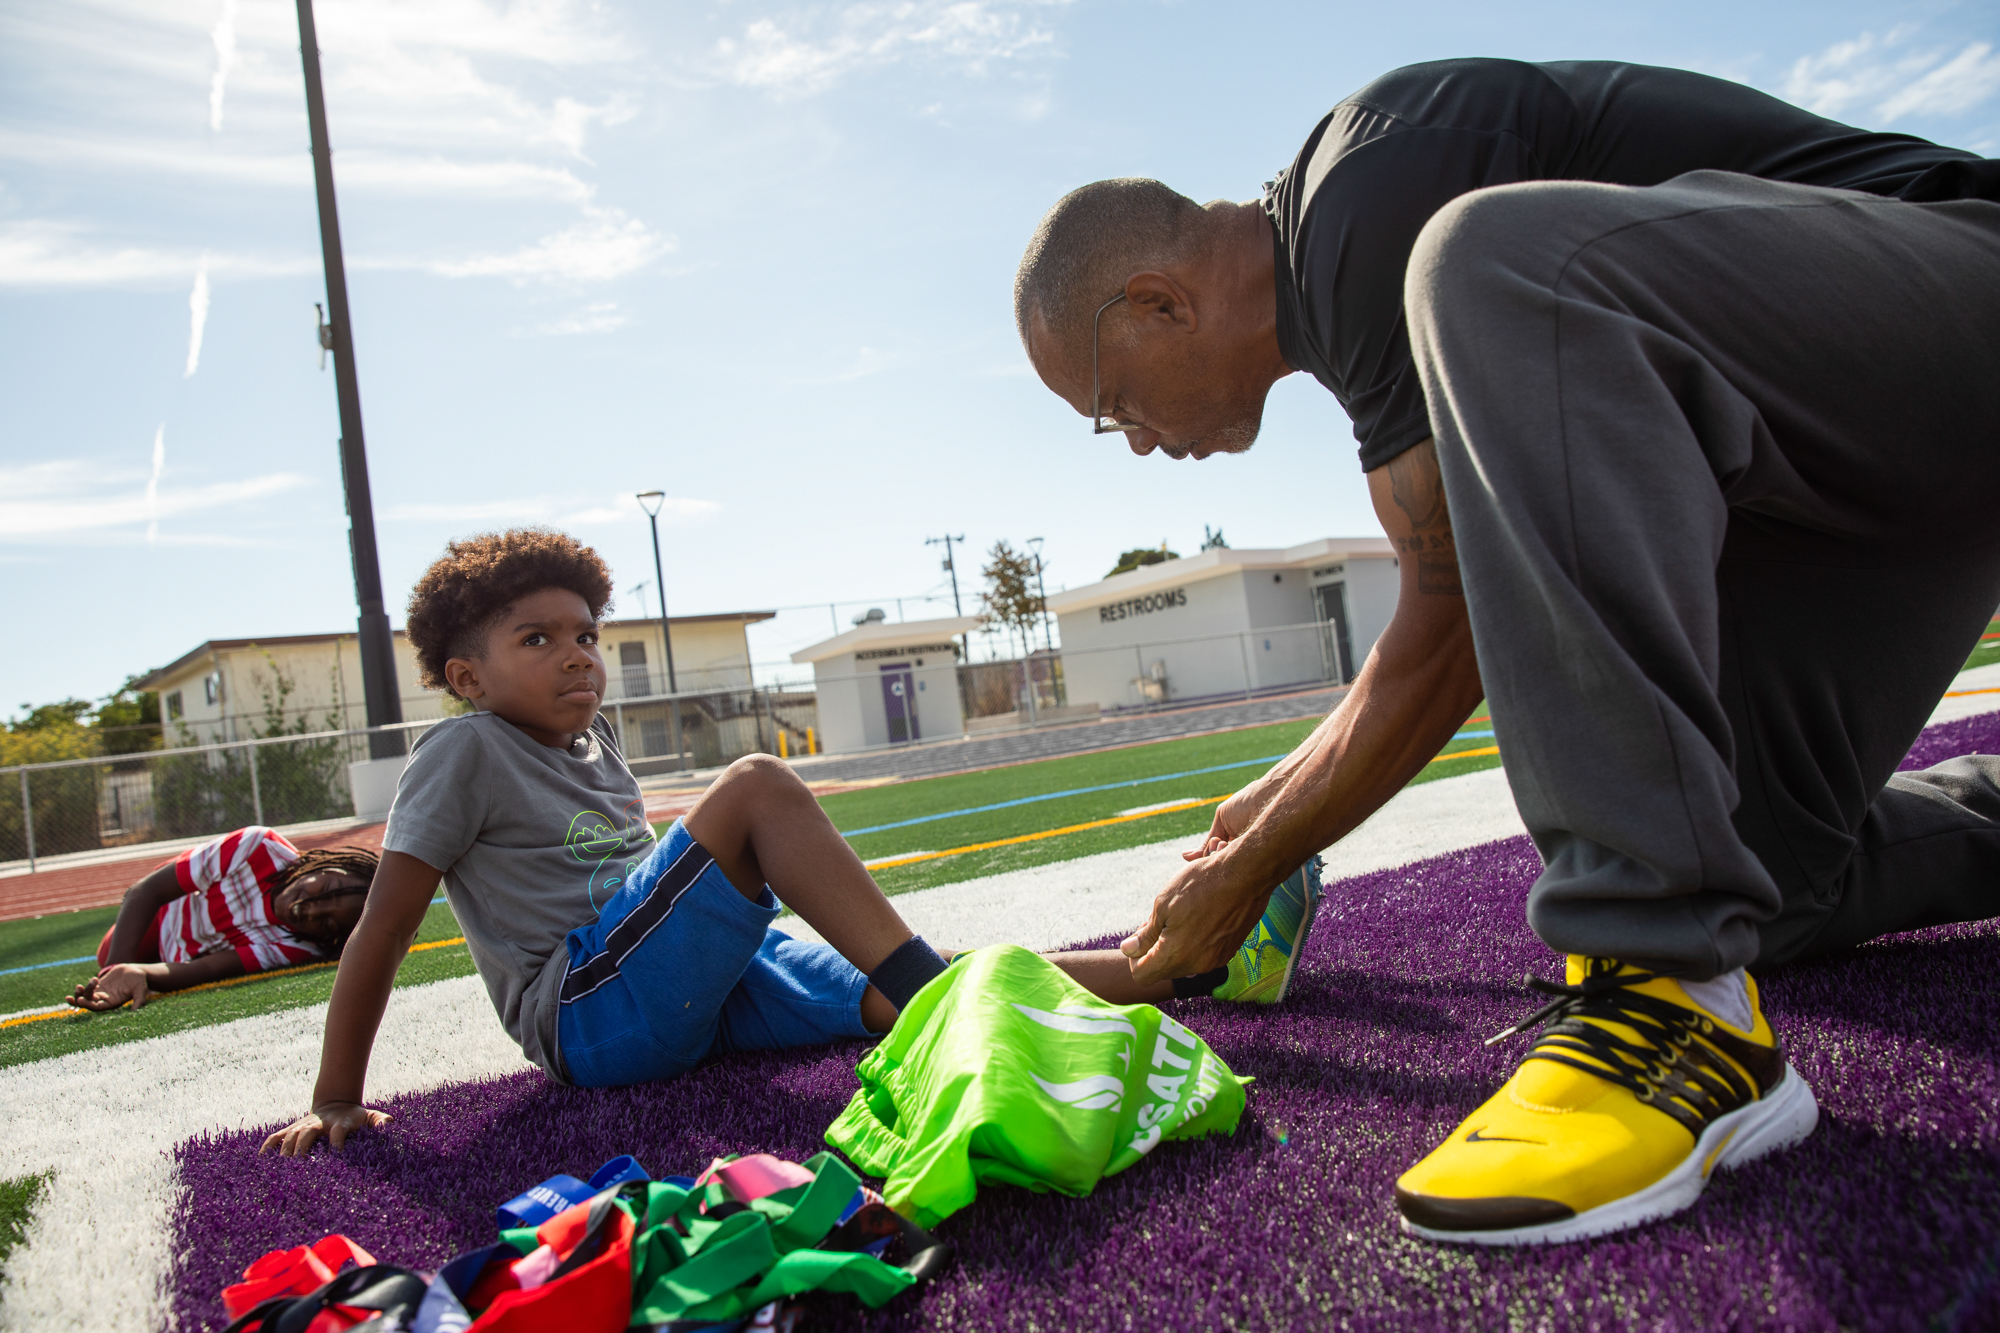 A man inspects the shoe of a child on a sports field.